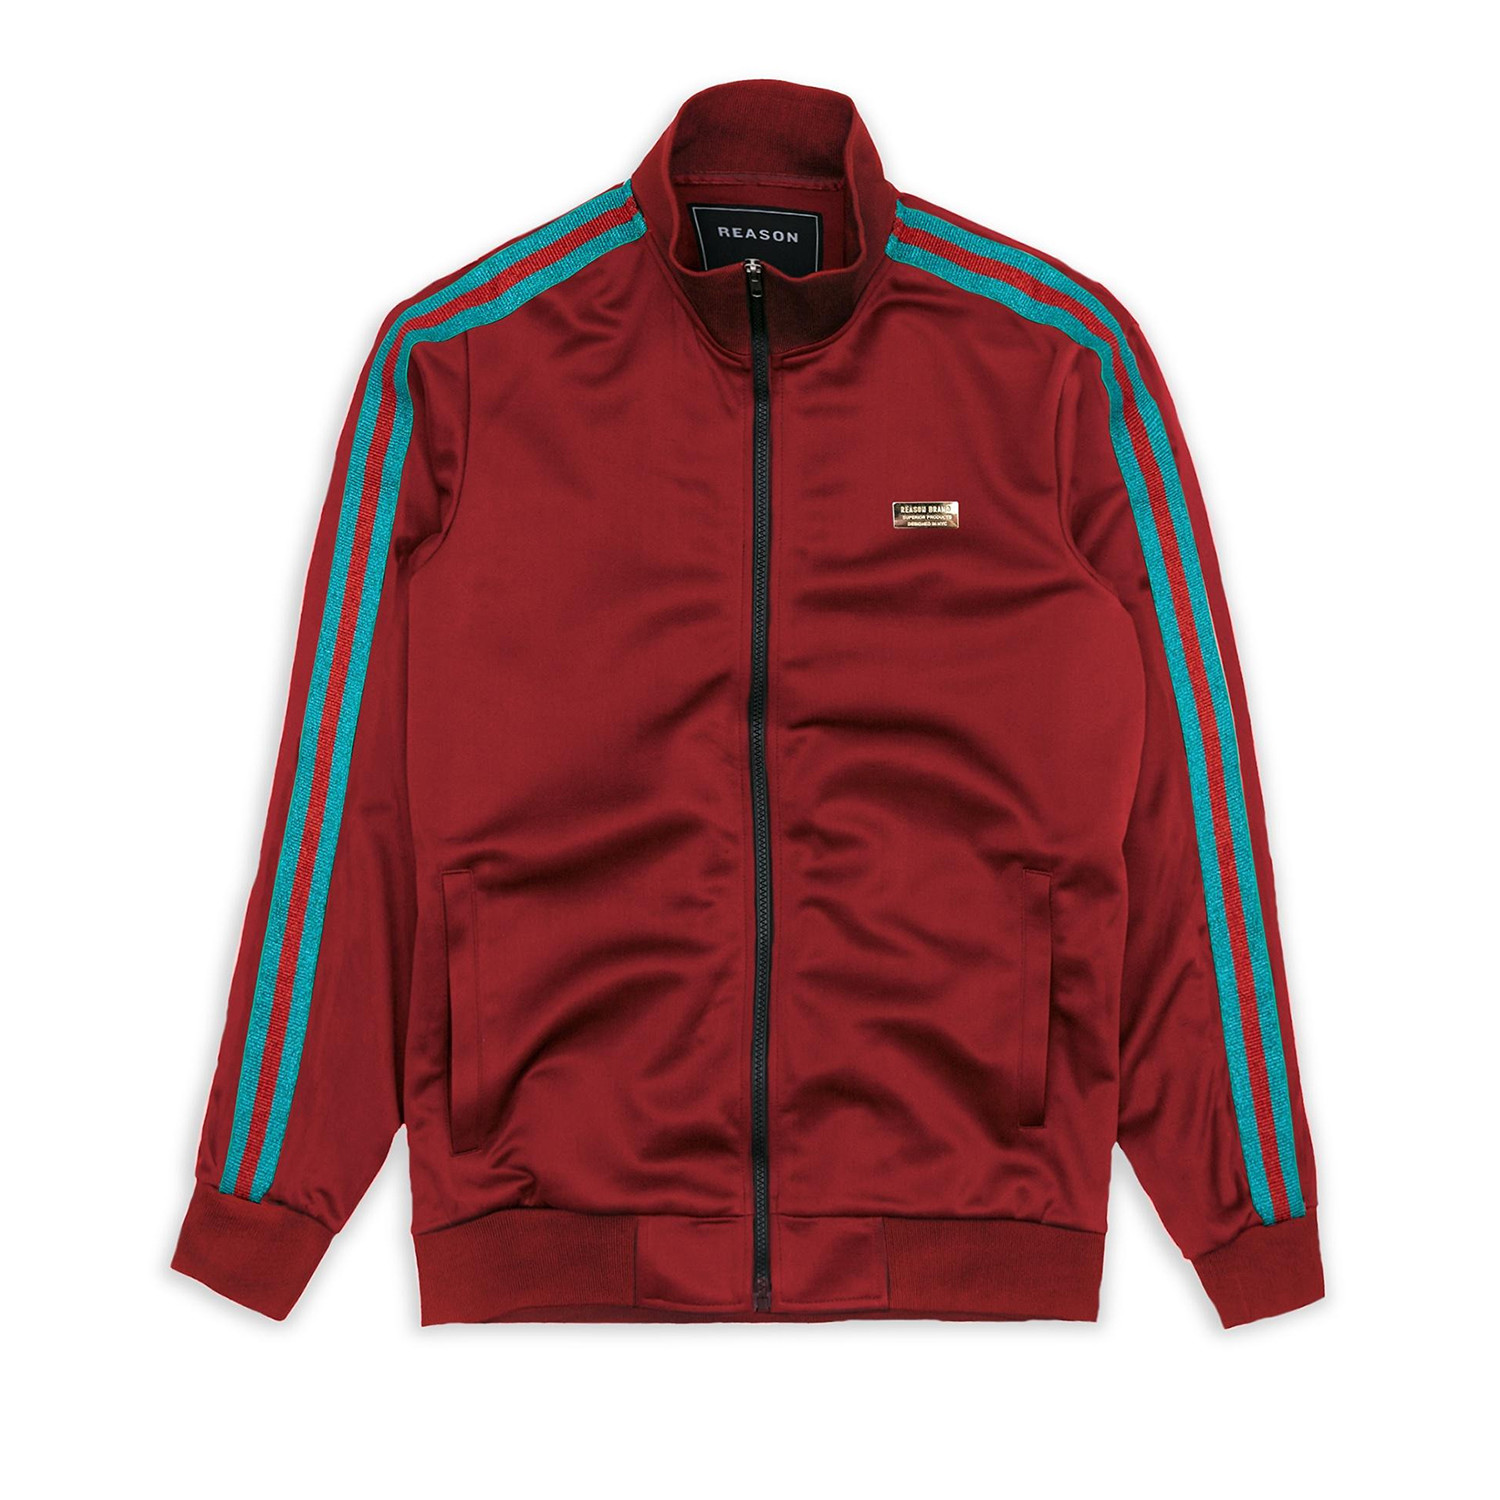 Mulberry Track Jacket // Burgundy (S) - Reason - Touch of Modern